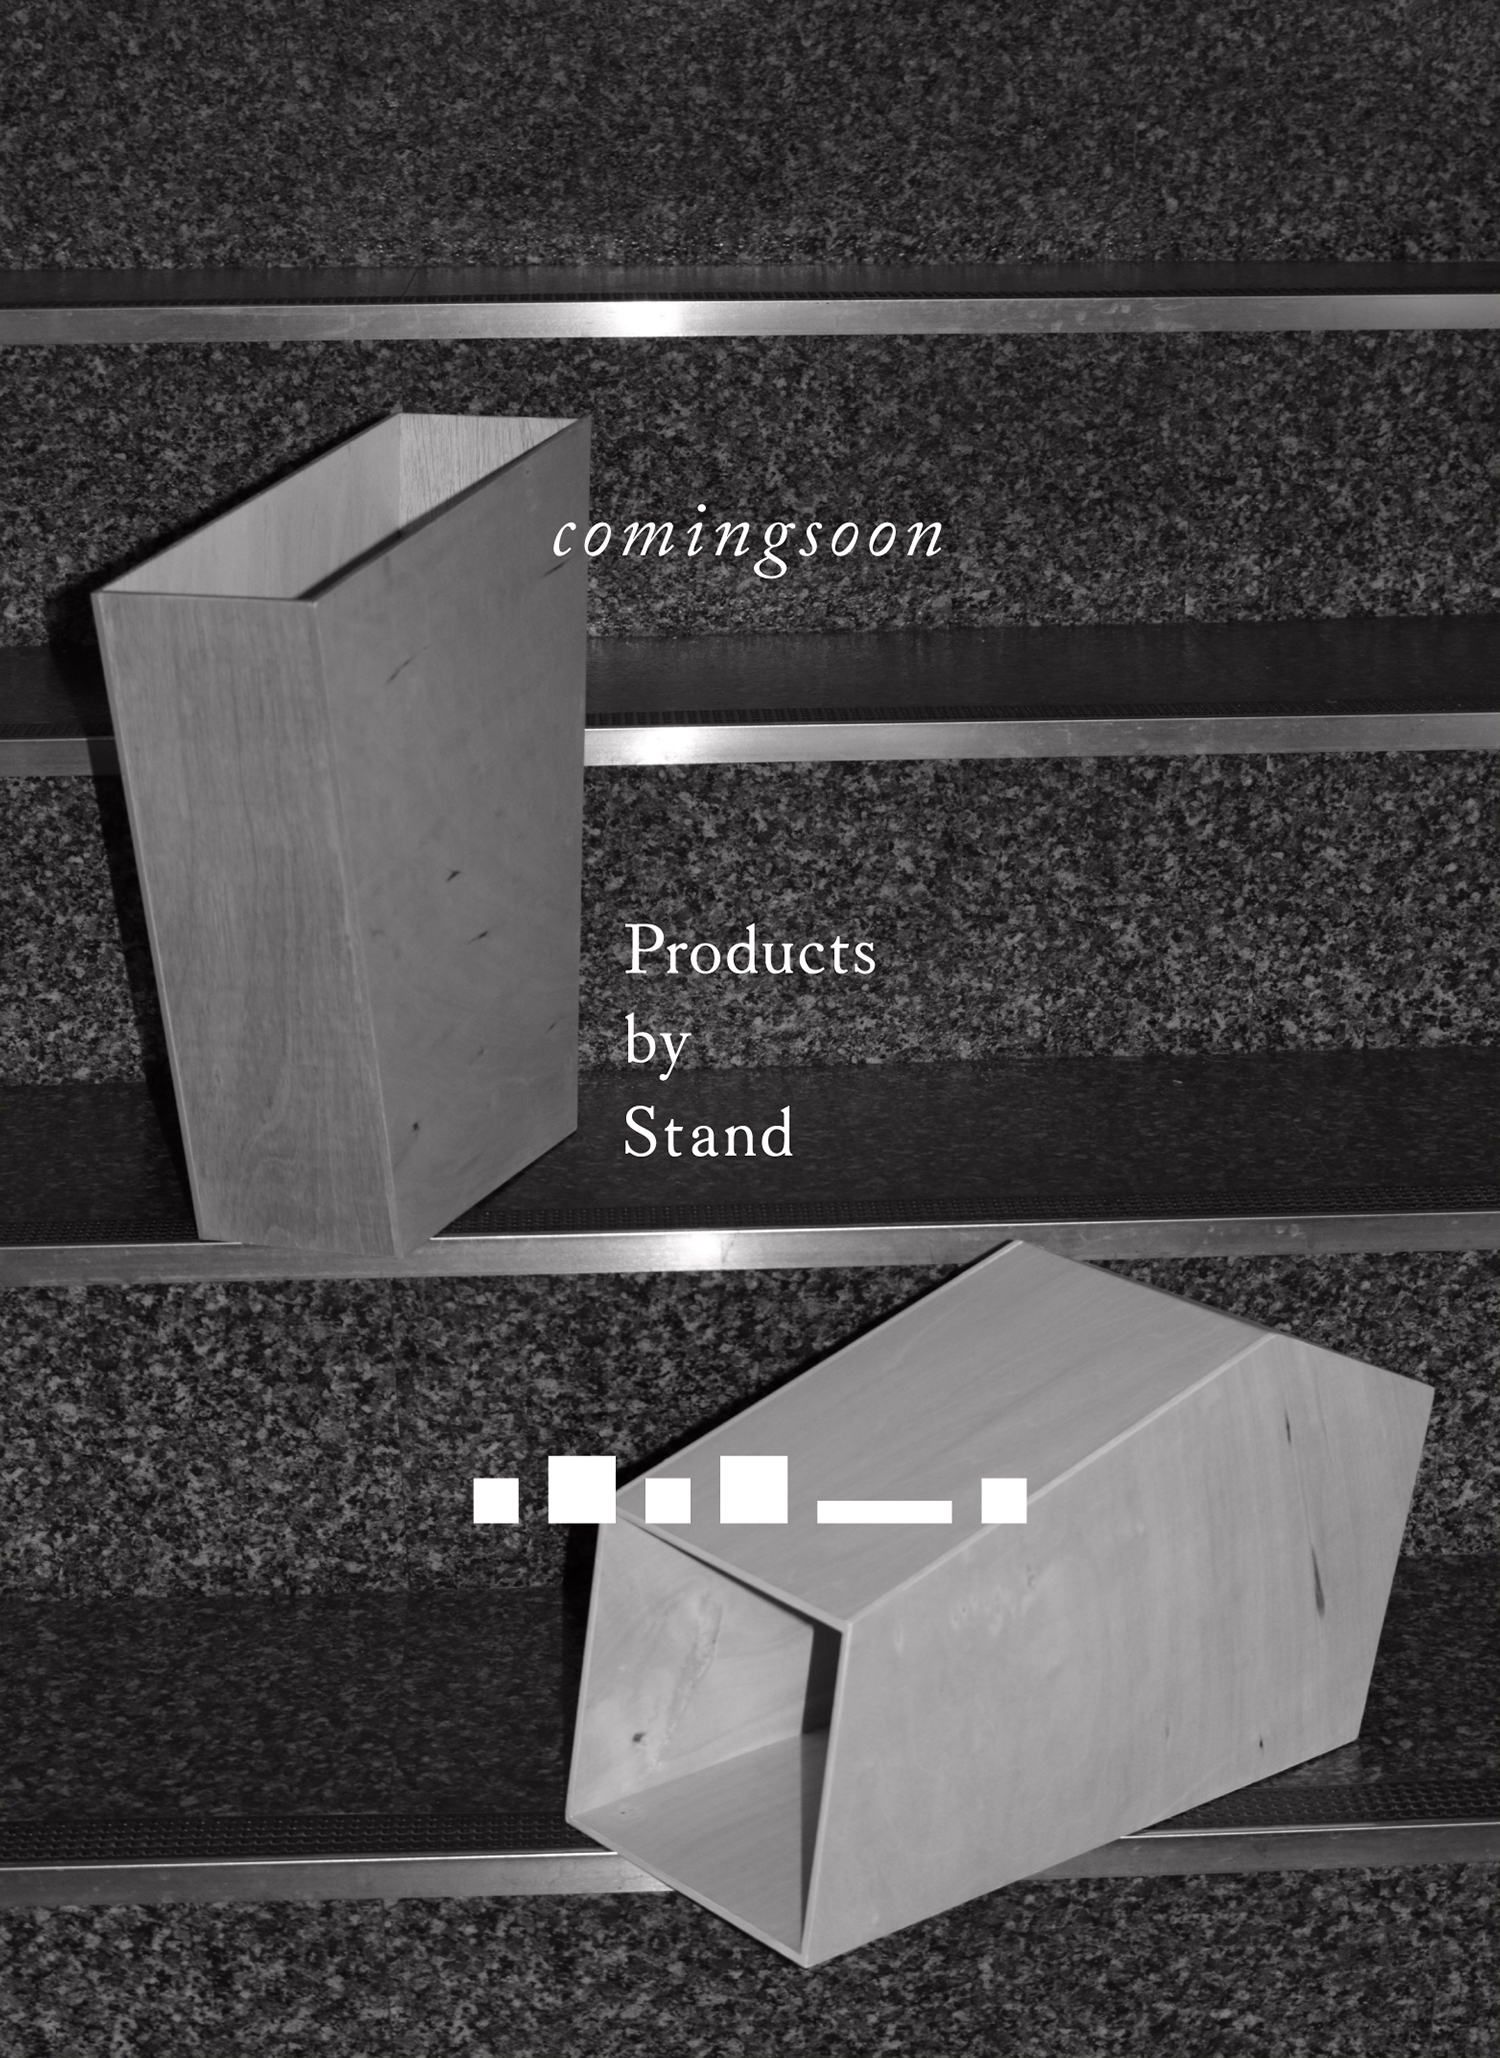 Products by Stand